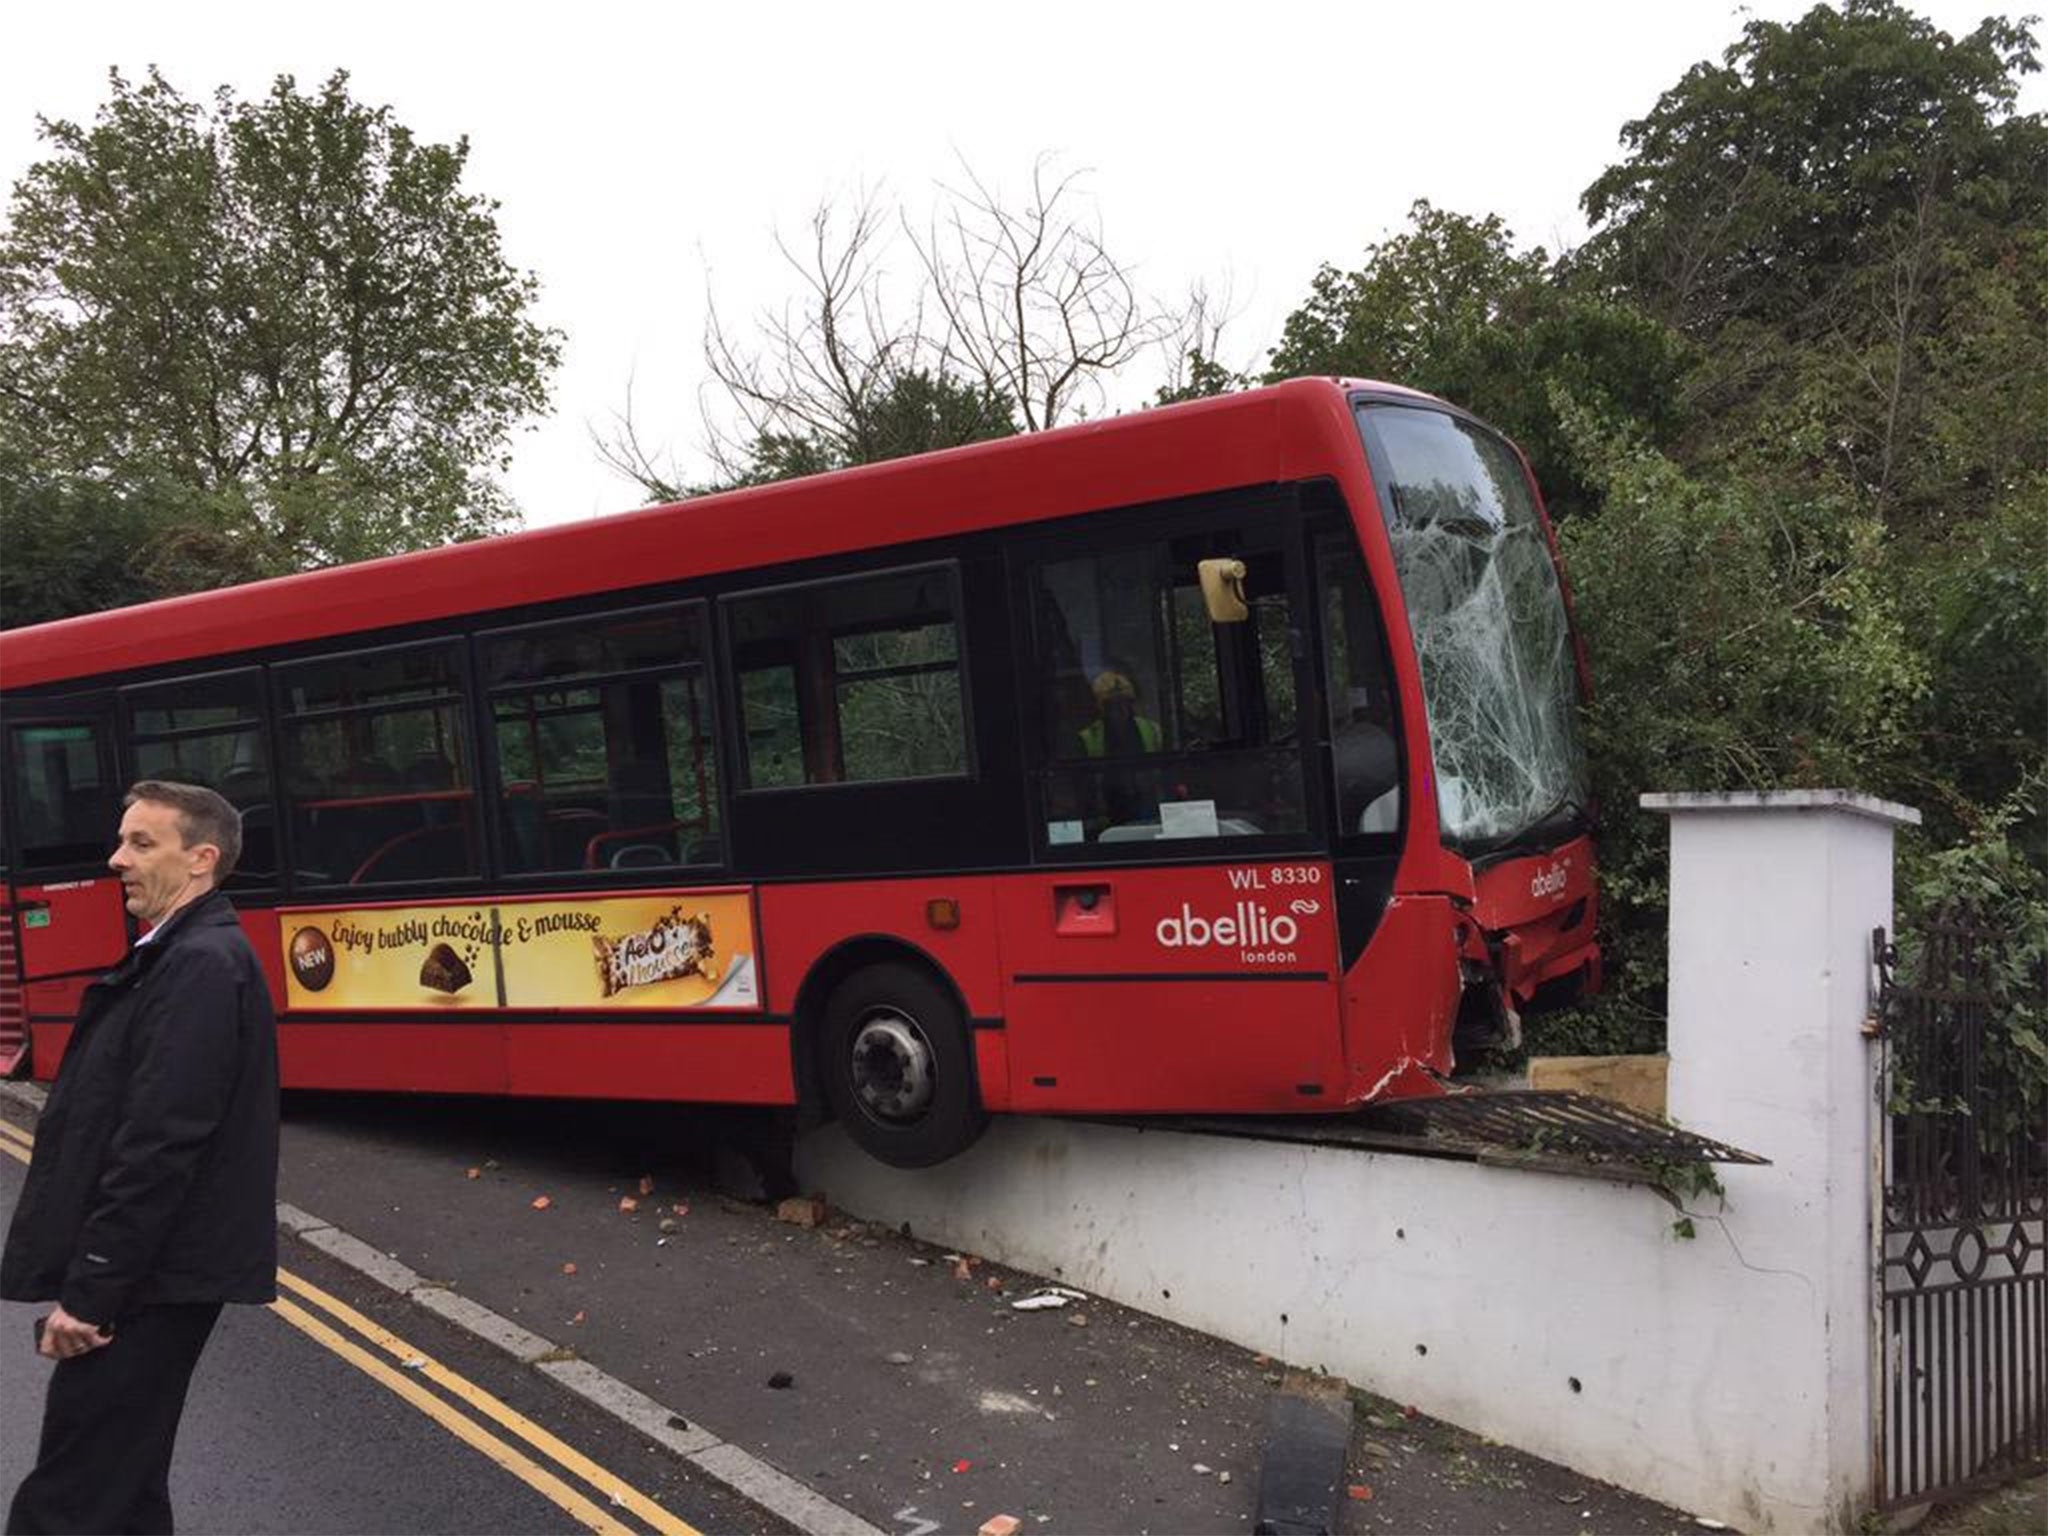 Police in Lewisham tweeted this image from the scene where a bus crashed into the front of a house